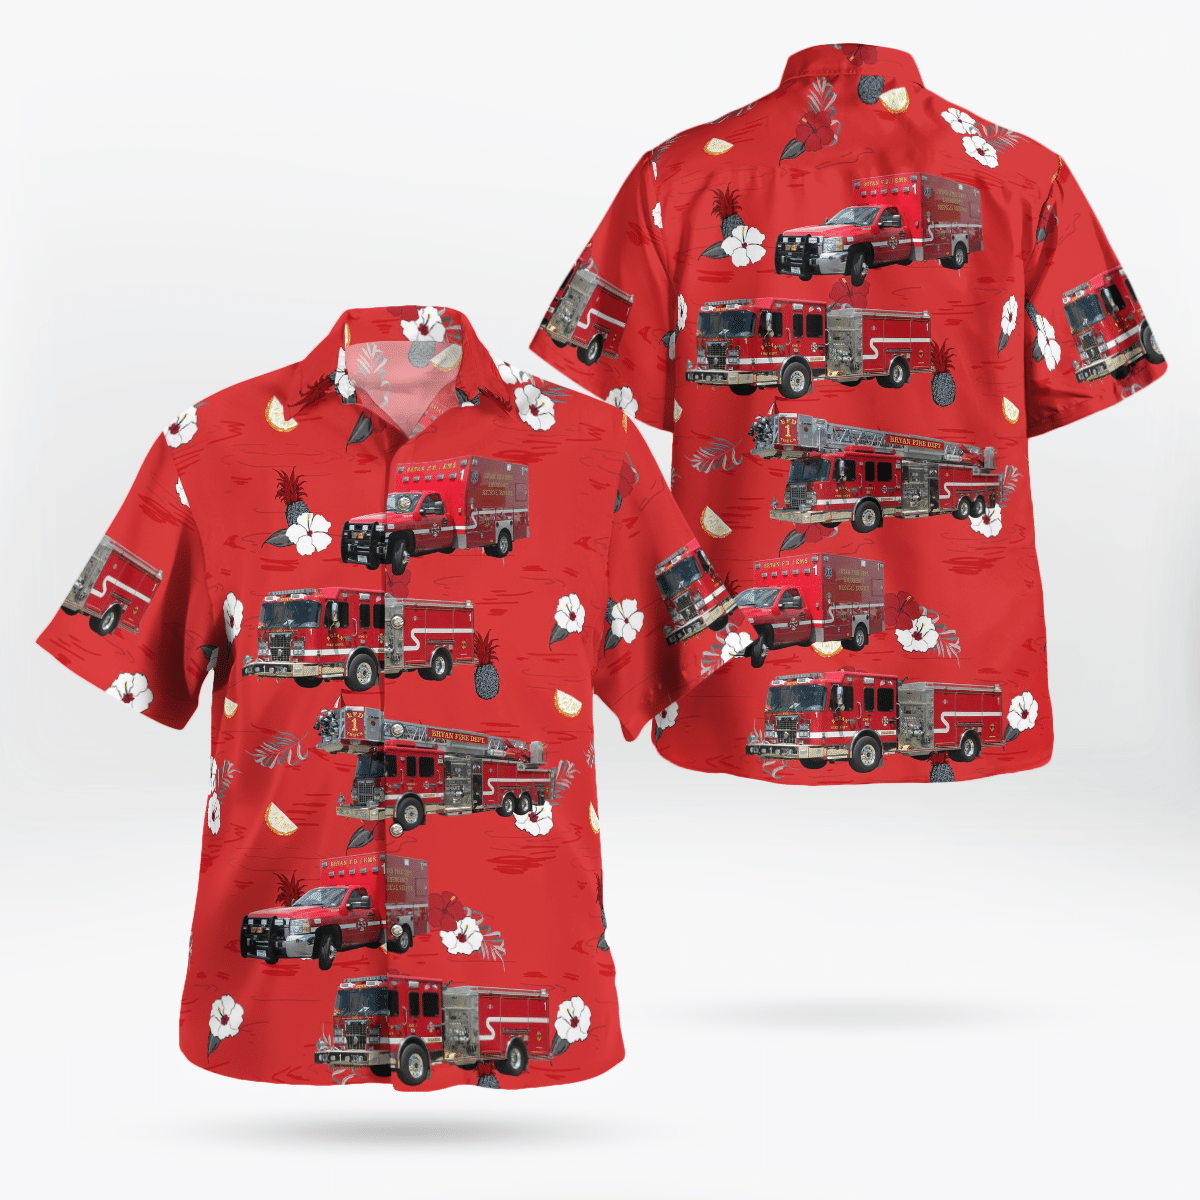 Some cool 3d hawaii shirt for this summer 93